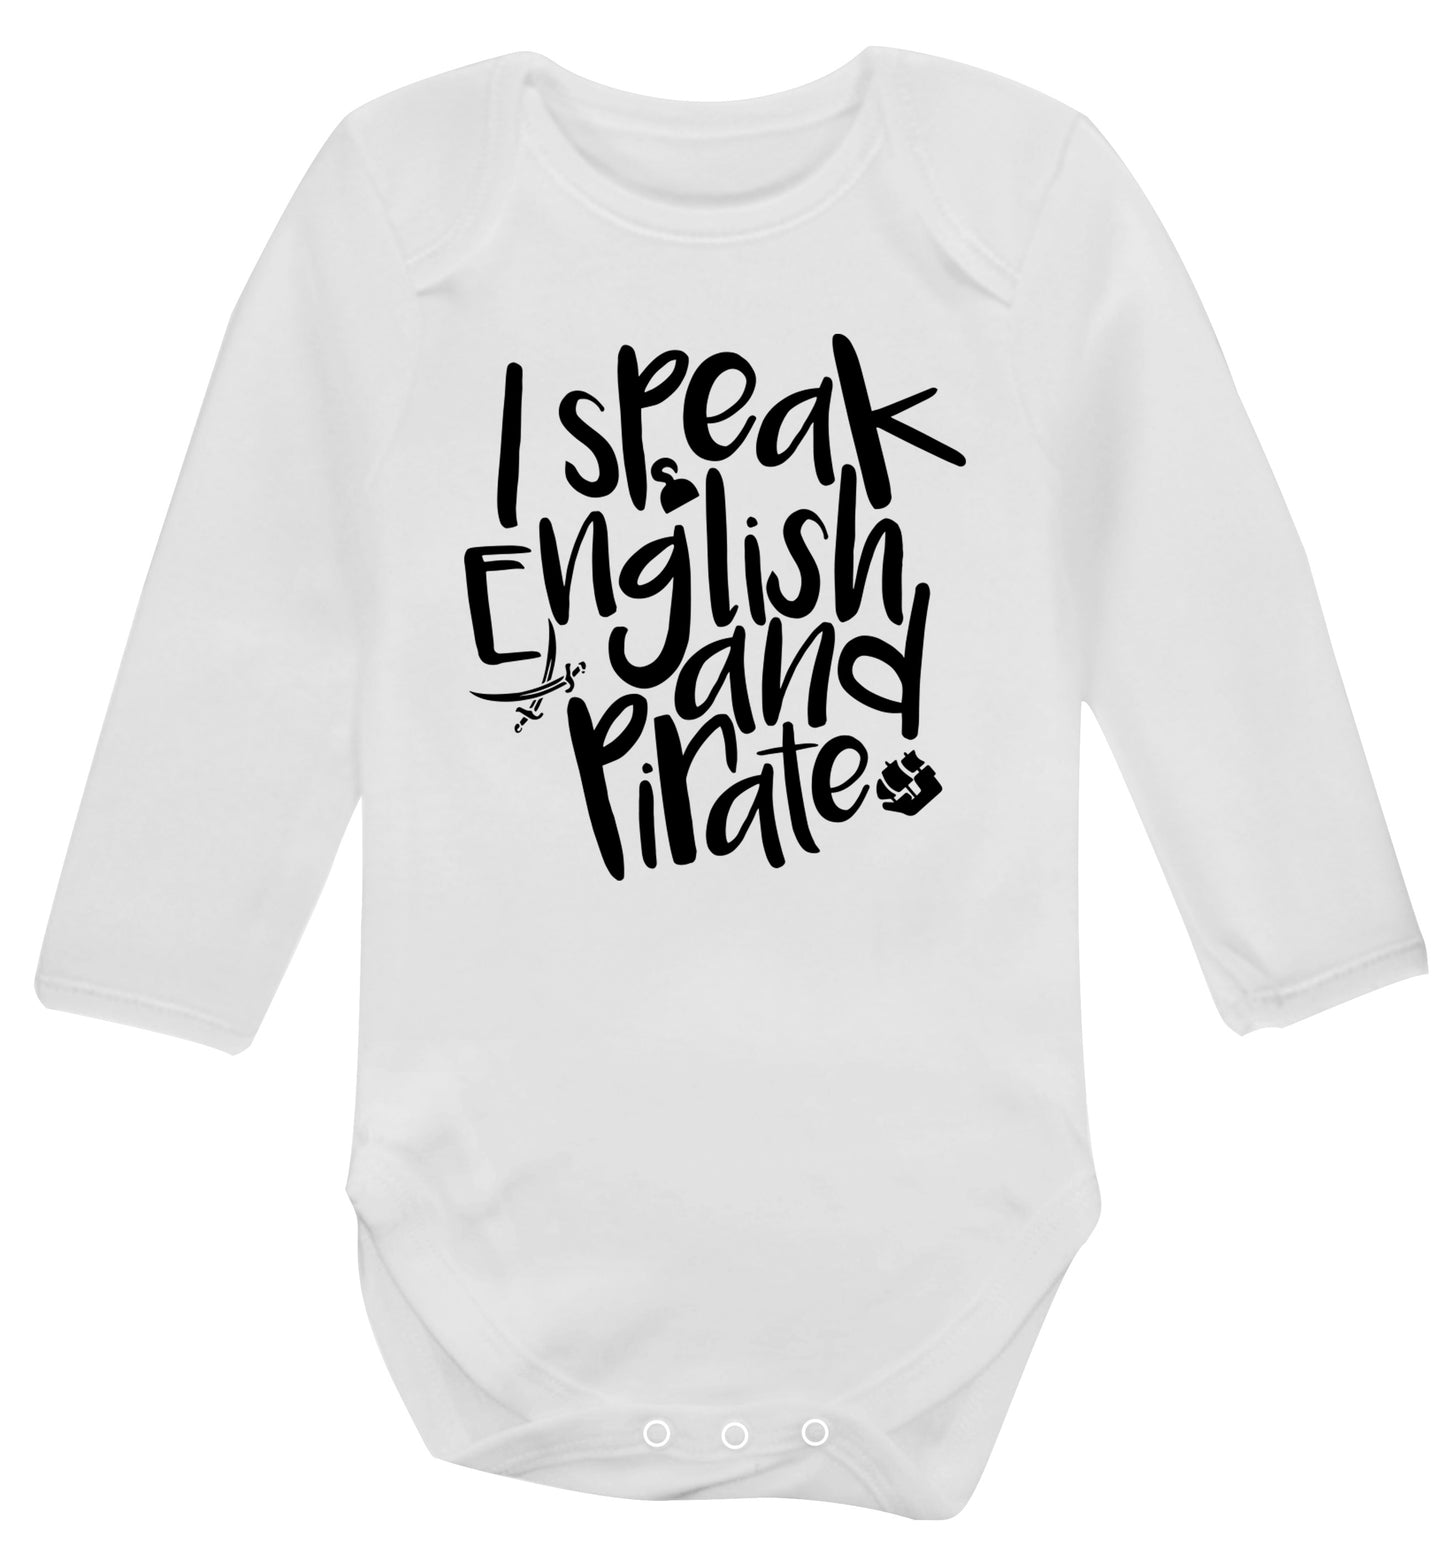 I speak English and pirate Baby Vest long sleeved white 6-12 months